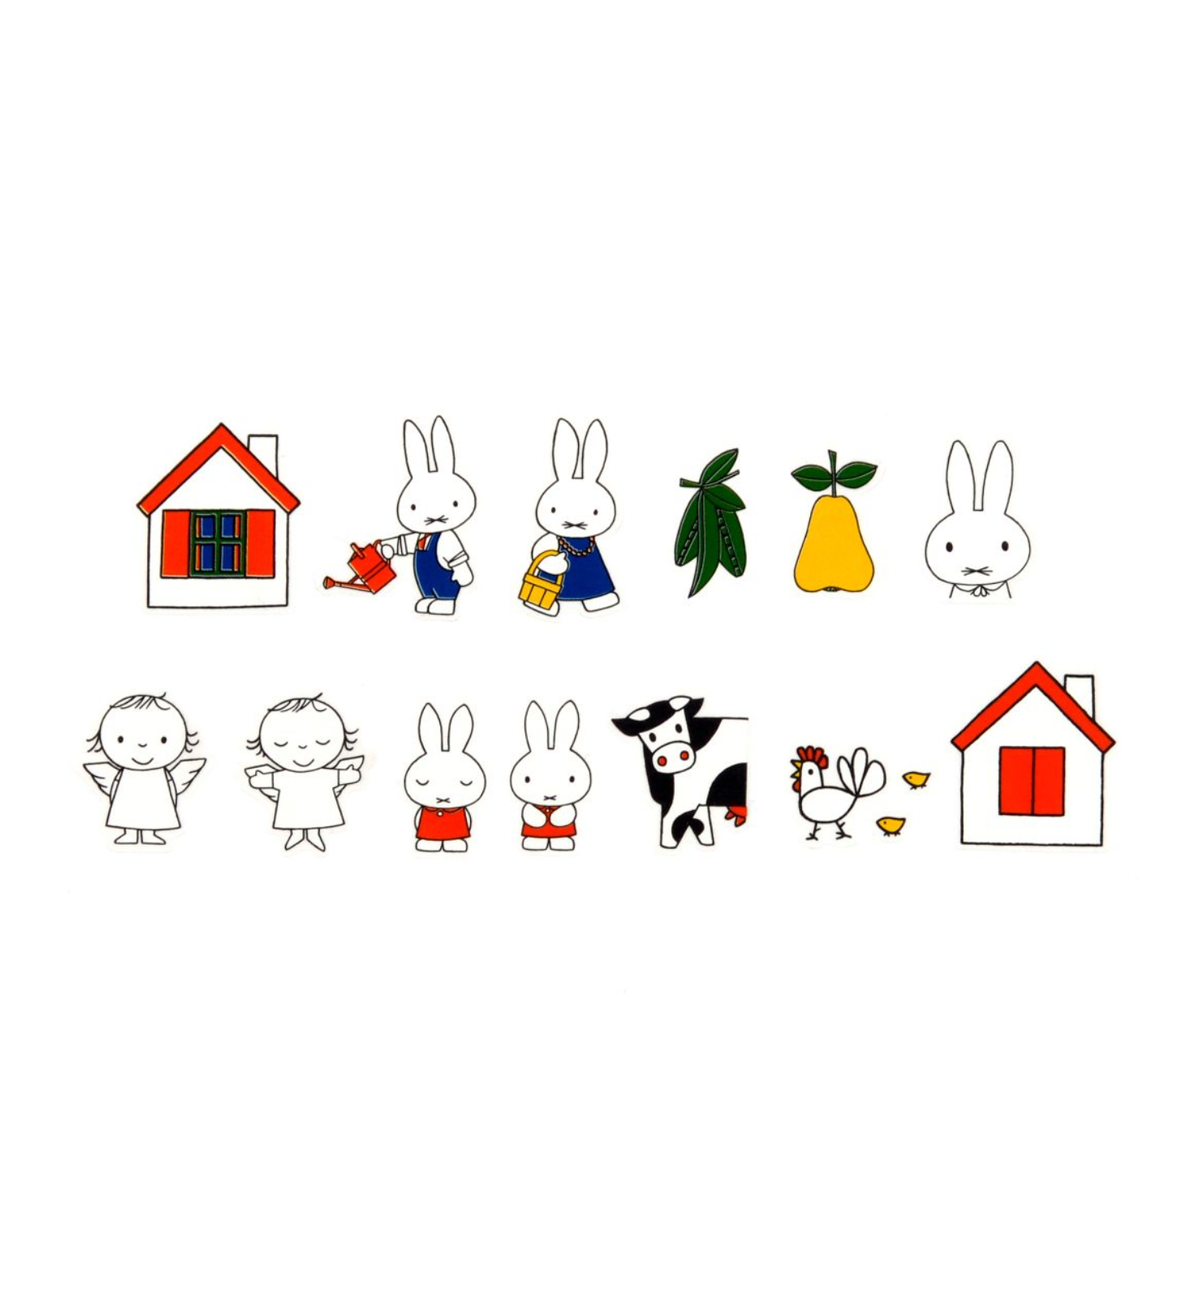 Miffy & Bande Roll Sticker [Miffy's House]